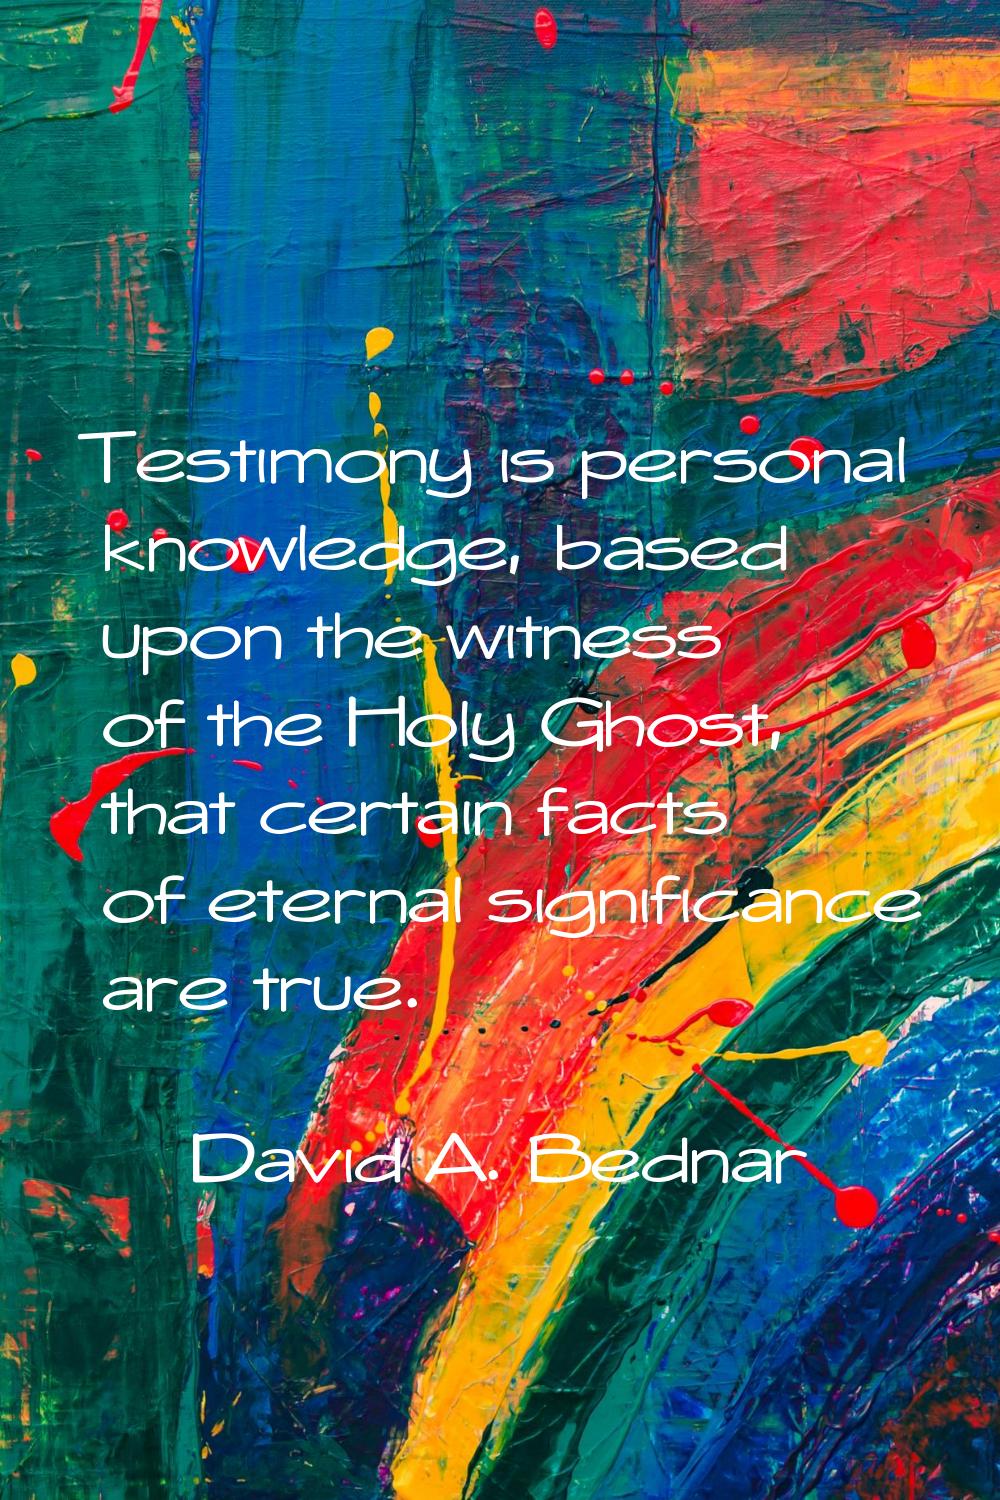 Testimony is personal knowledge, based upon the witness of the Holy Ghost, that certain facts of et